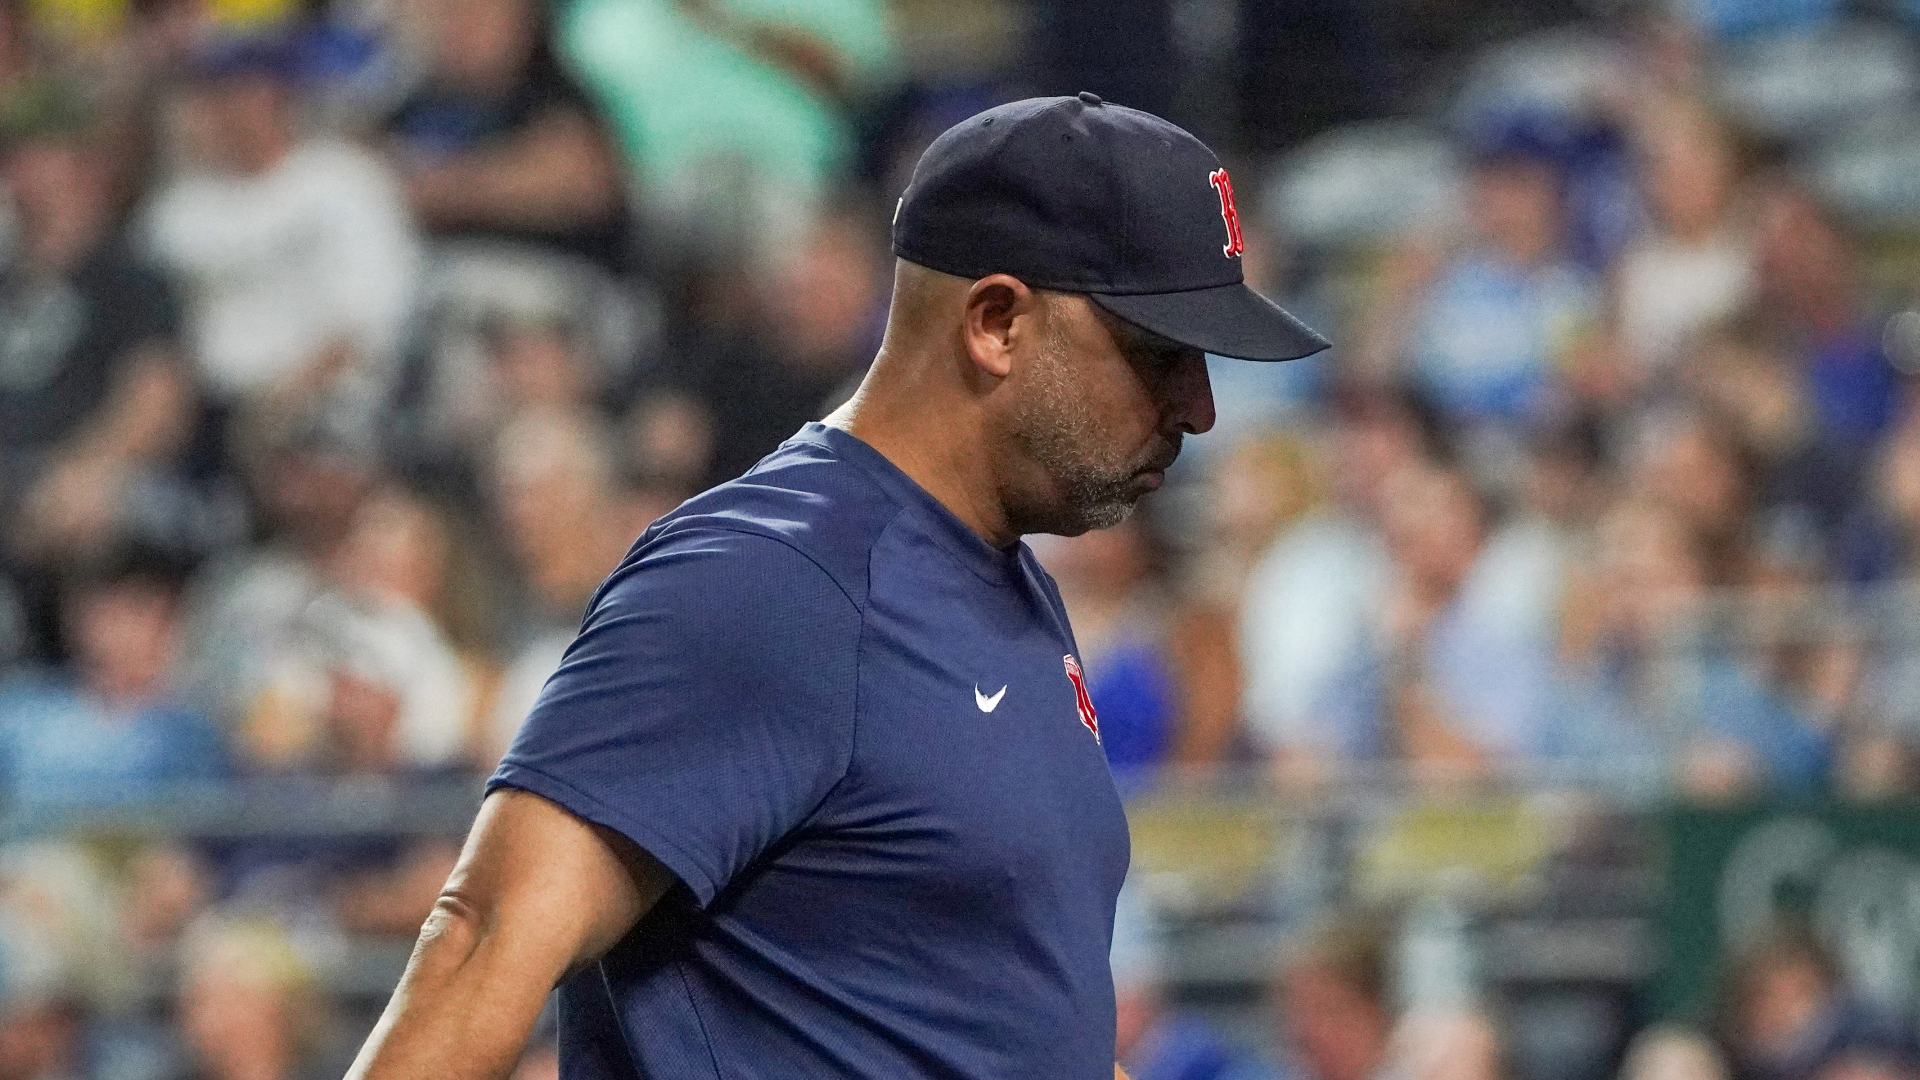 Here's what Alex Cora said about his future, his goals and more